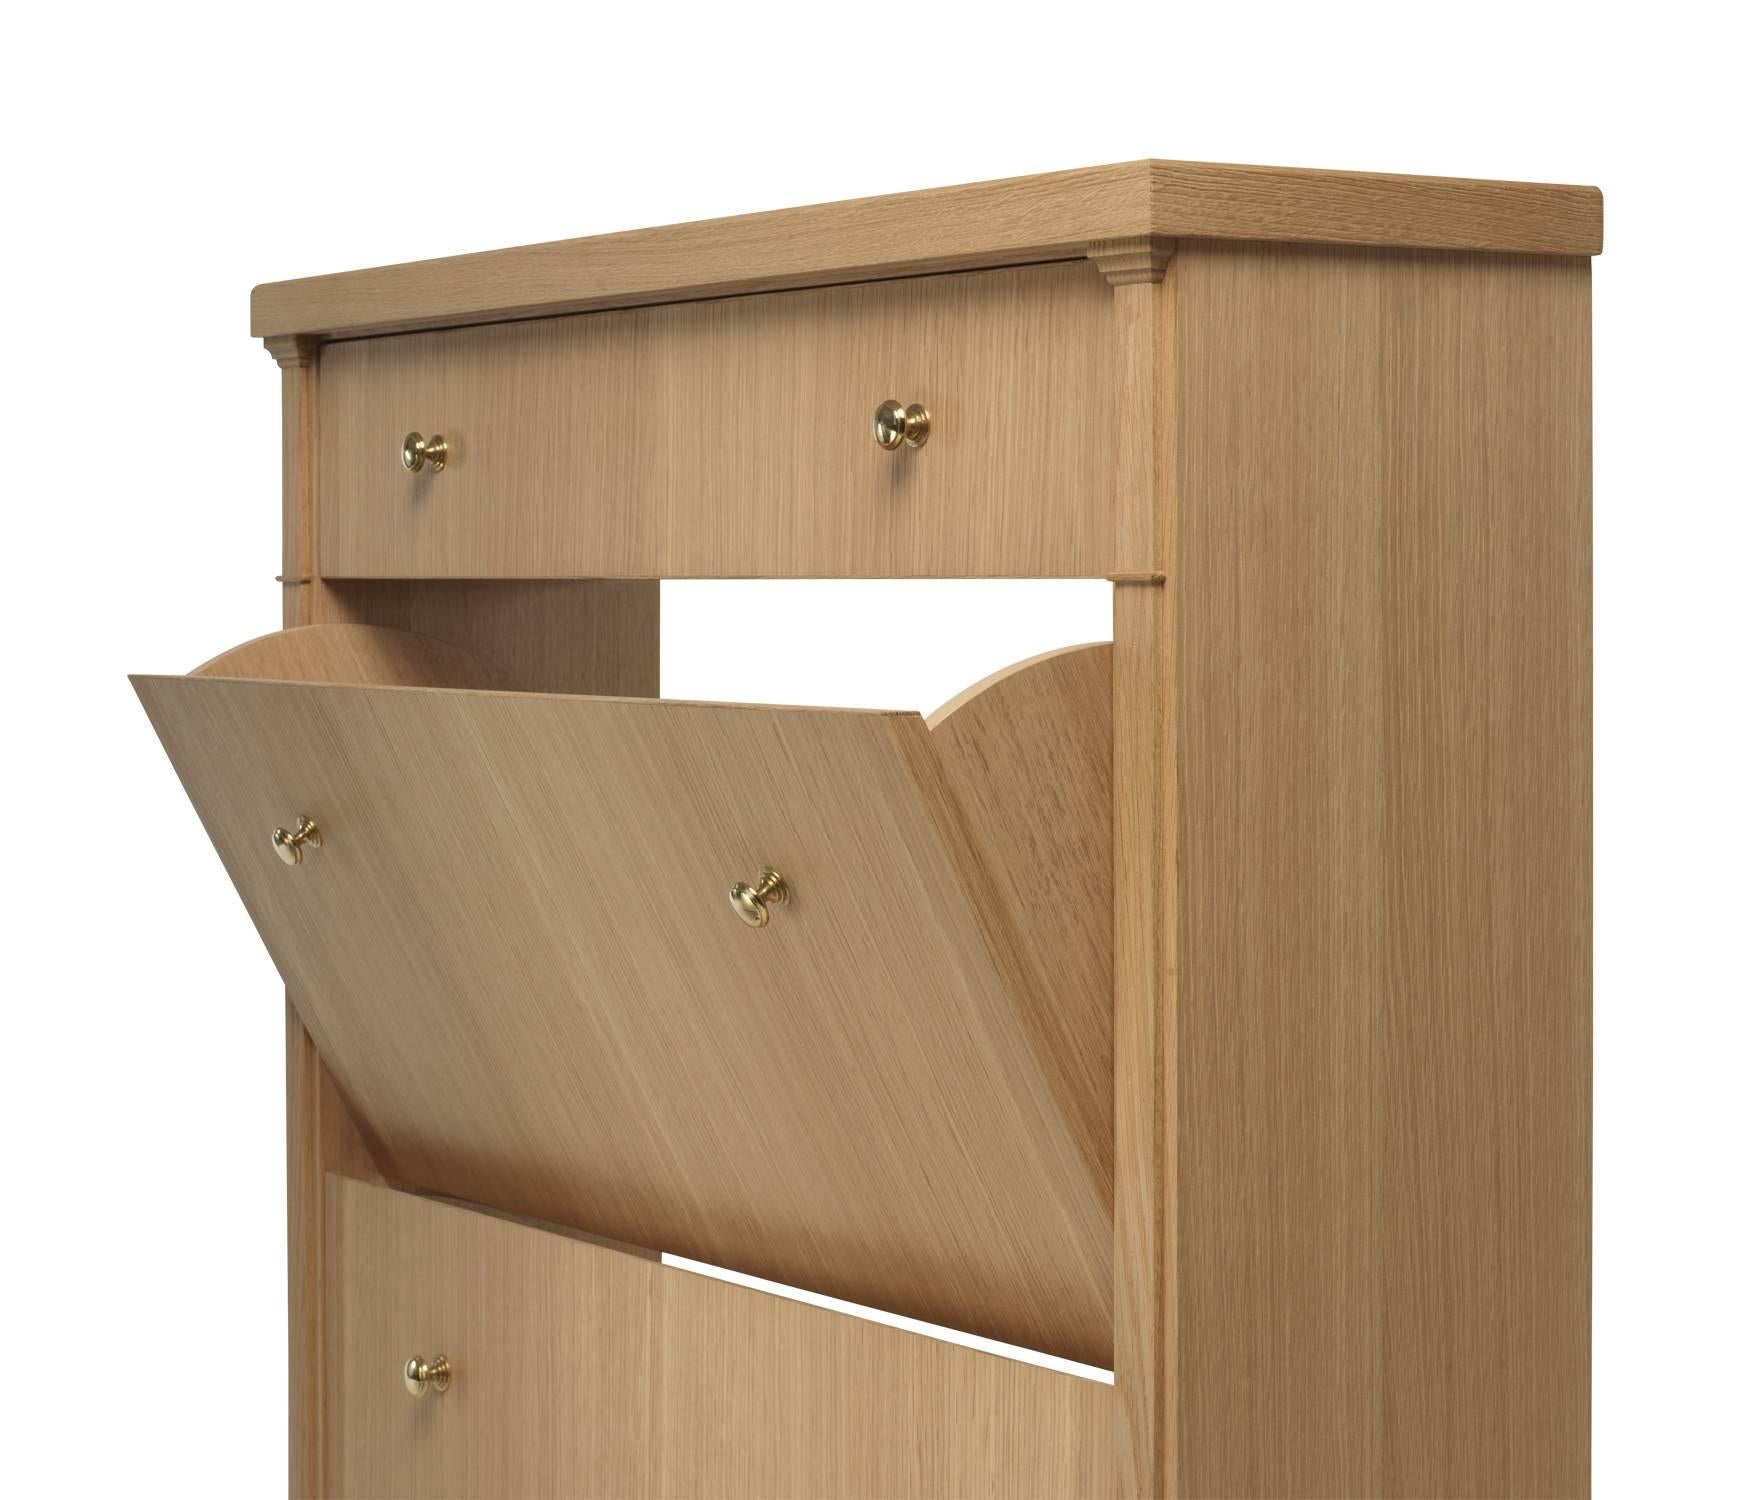 A storage cabinet for ladies shoes, featuring drawers that rotate outwards, giving easy access to shoes while providing clean lines when closed. Can be customized to any size.